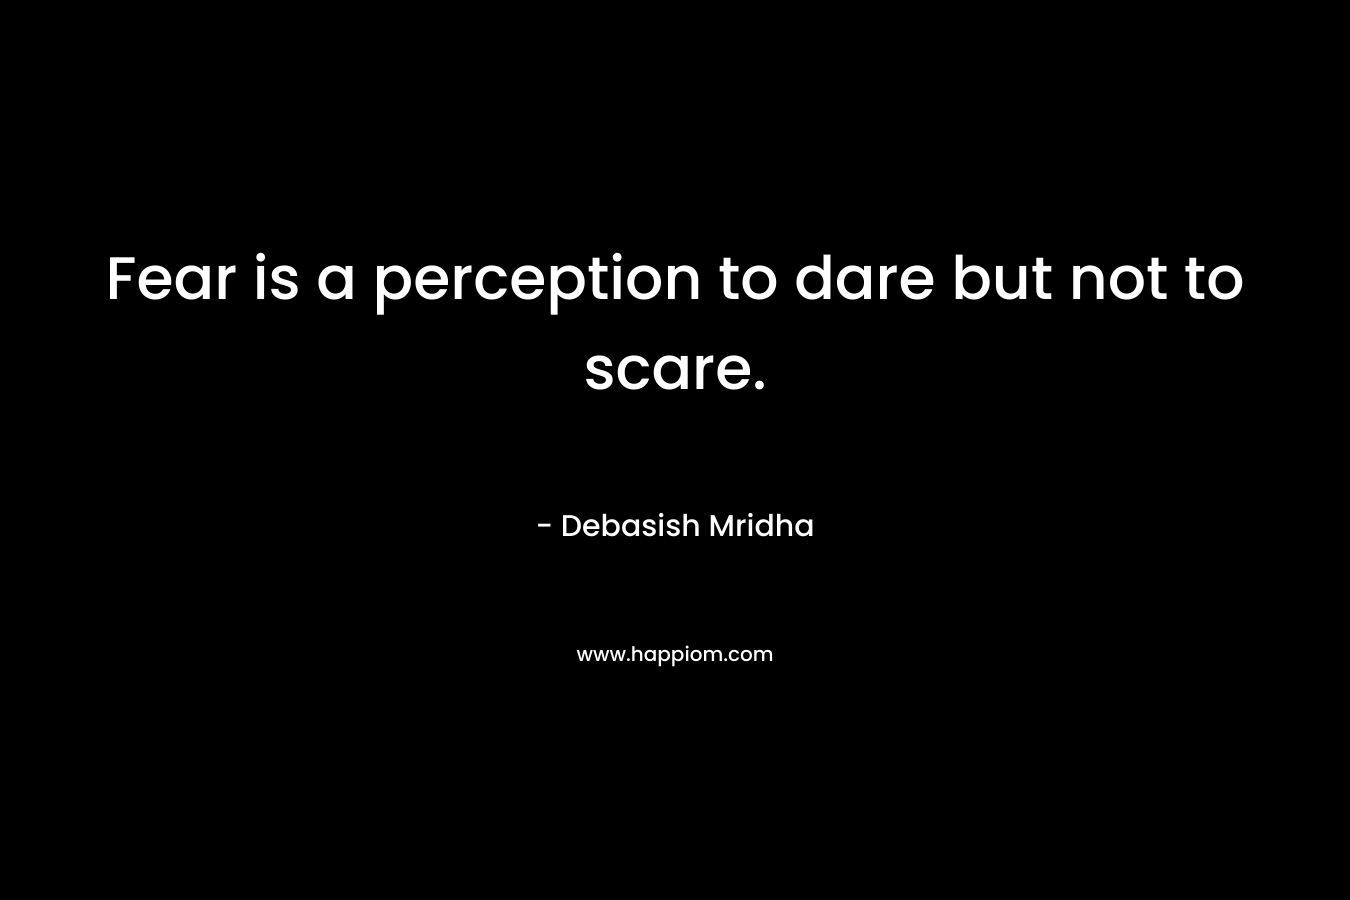 Fear is a perception to dare but not to scare. – Debasish Mridha